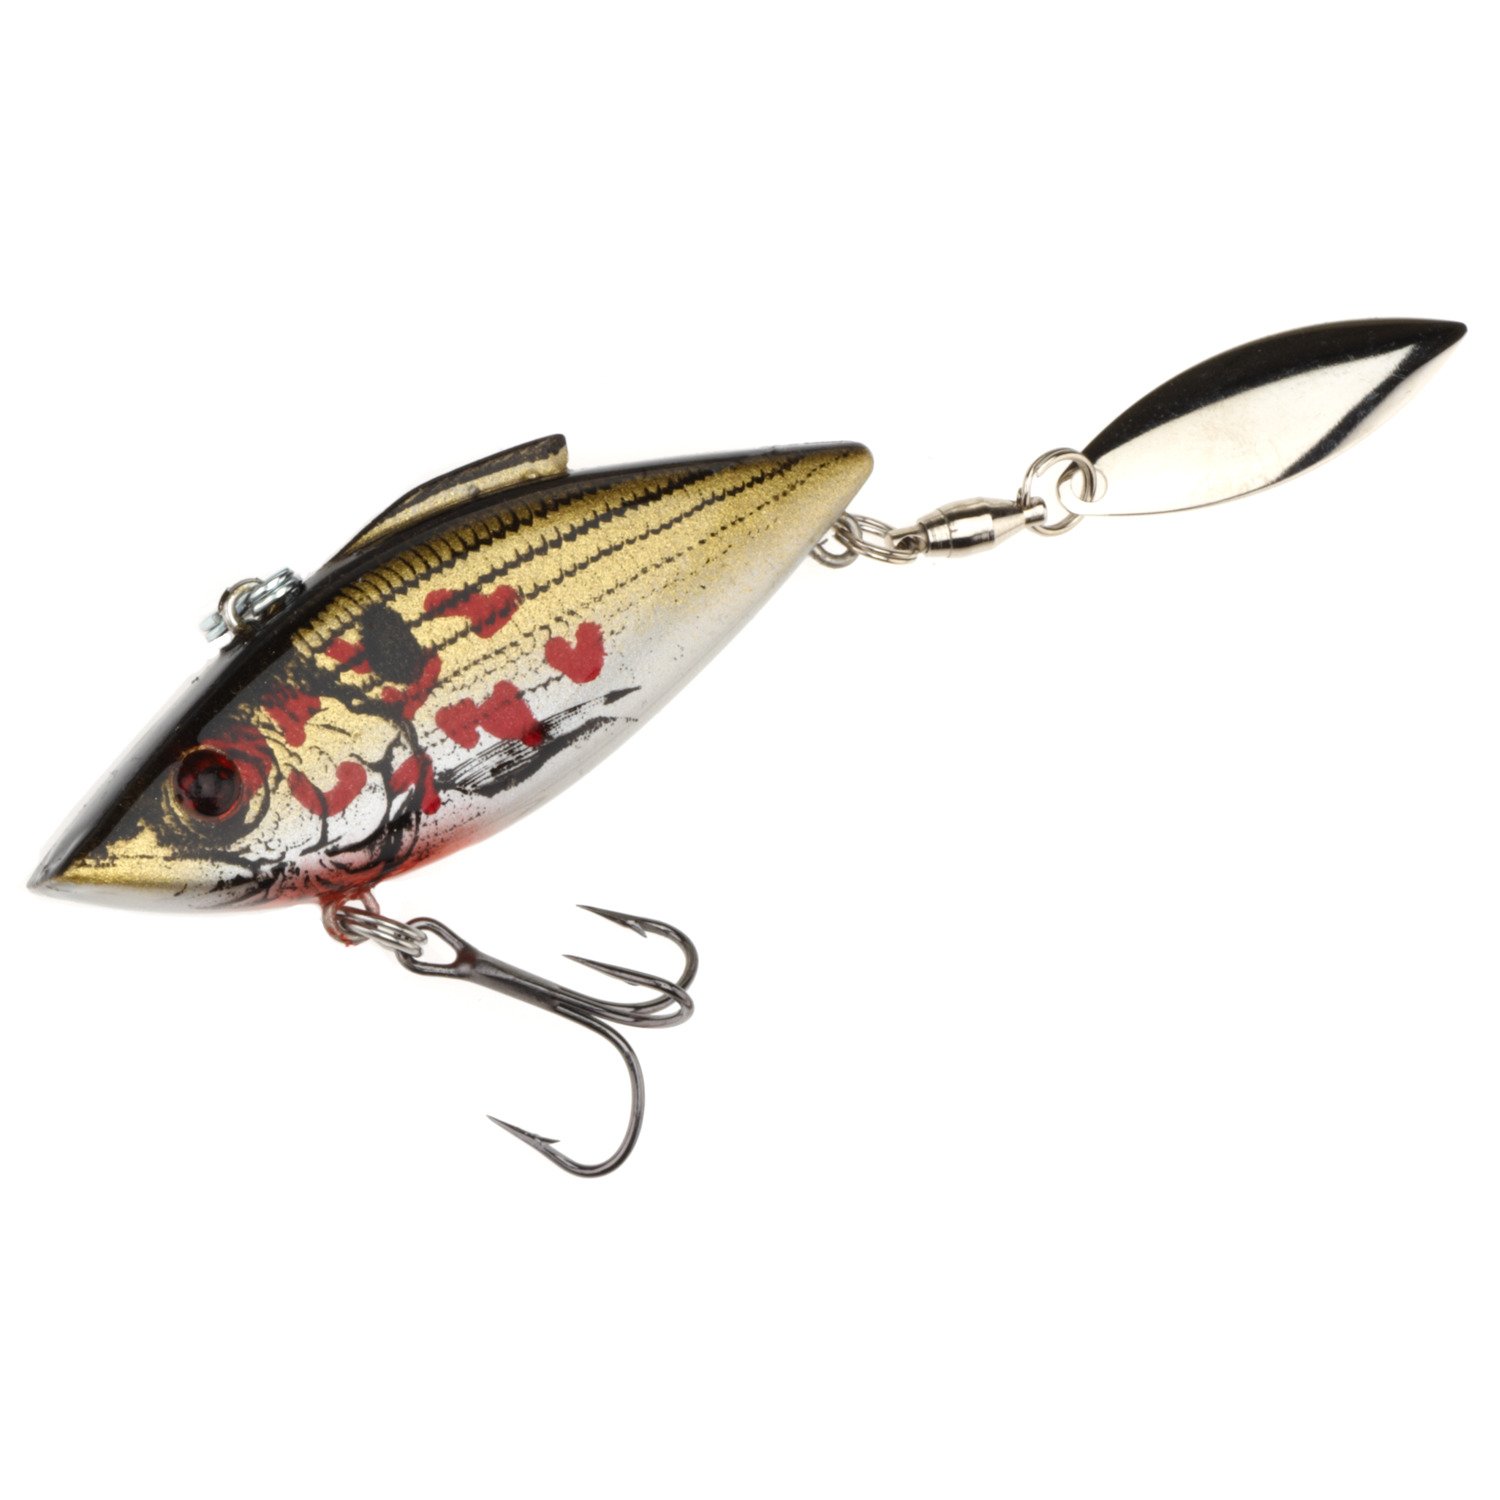 Academy Sports + Outdoors Bill Lewis Spin Trap® 1/4 oz. Lipless Crankbait